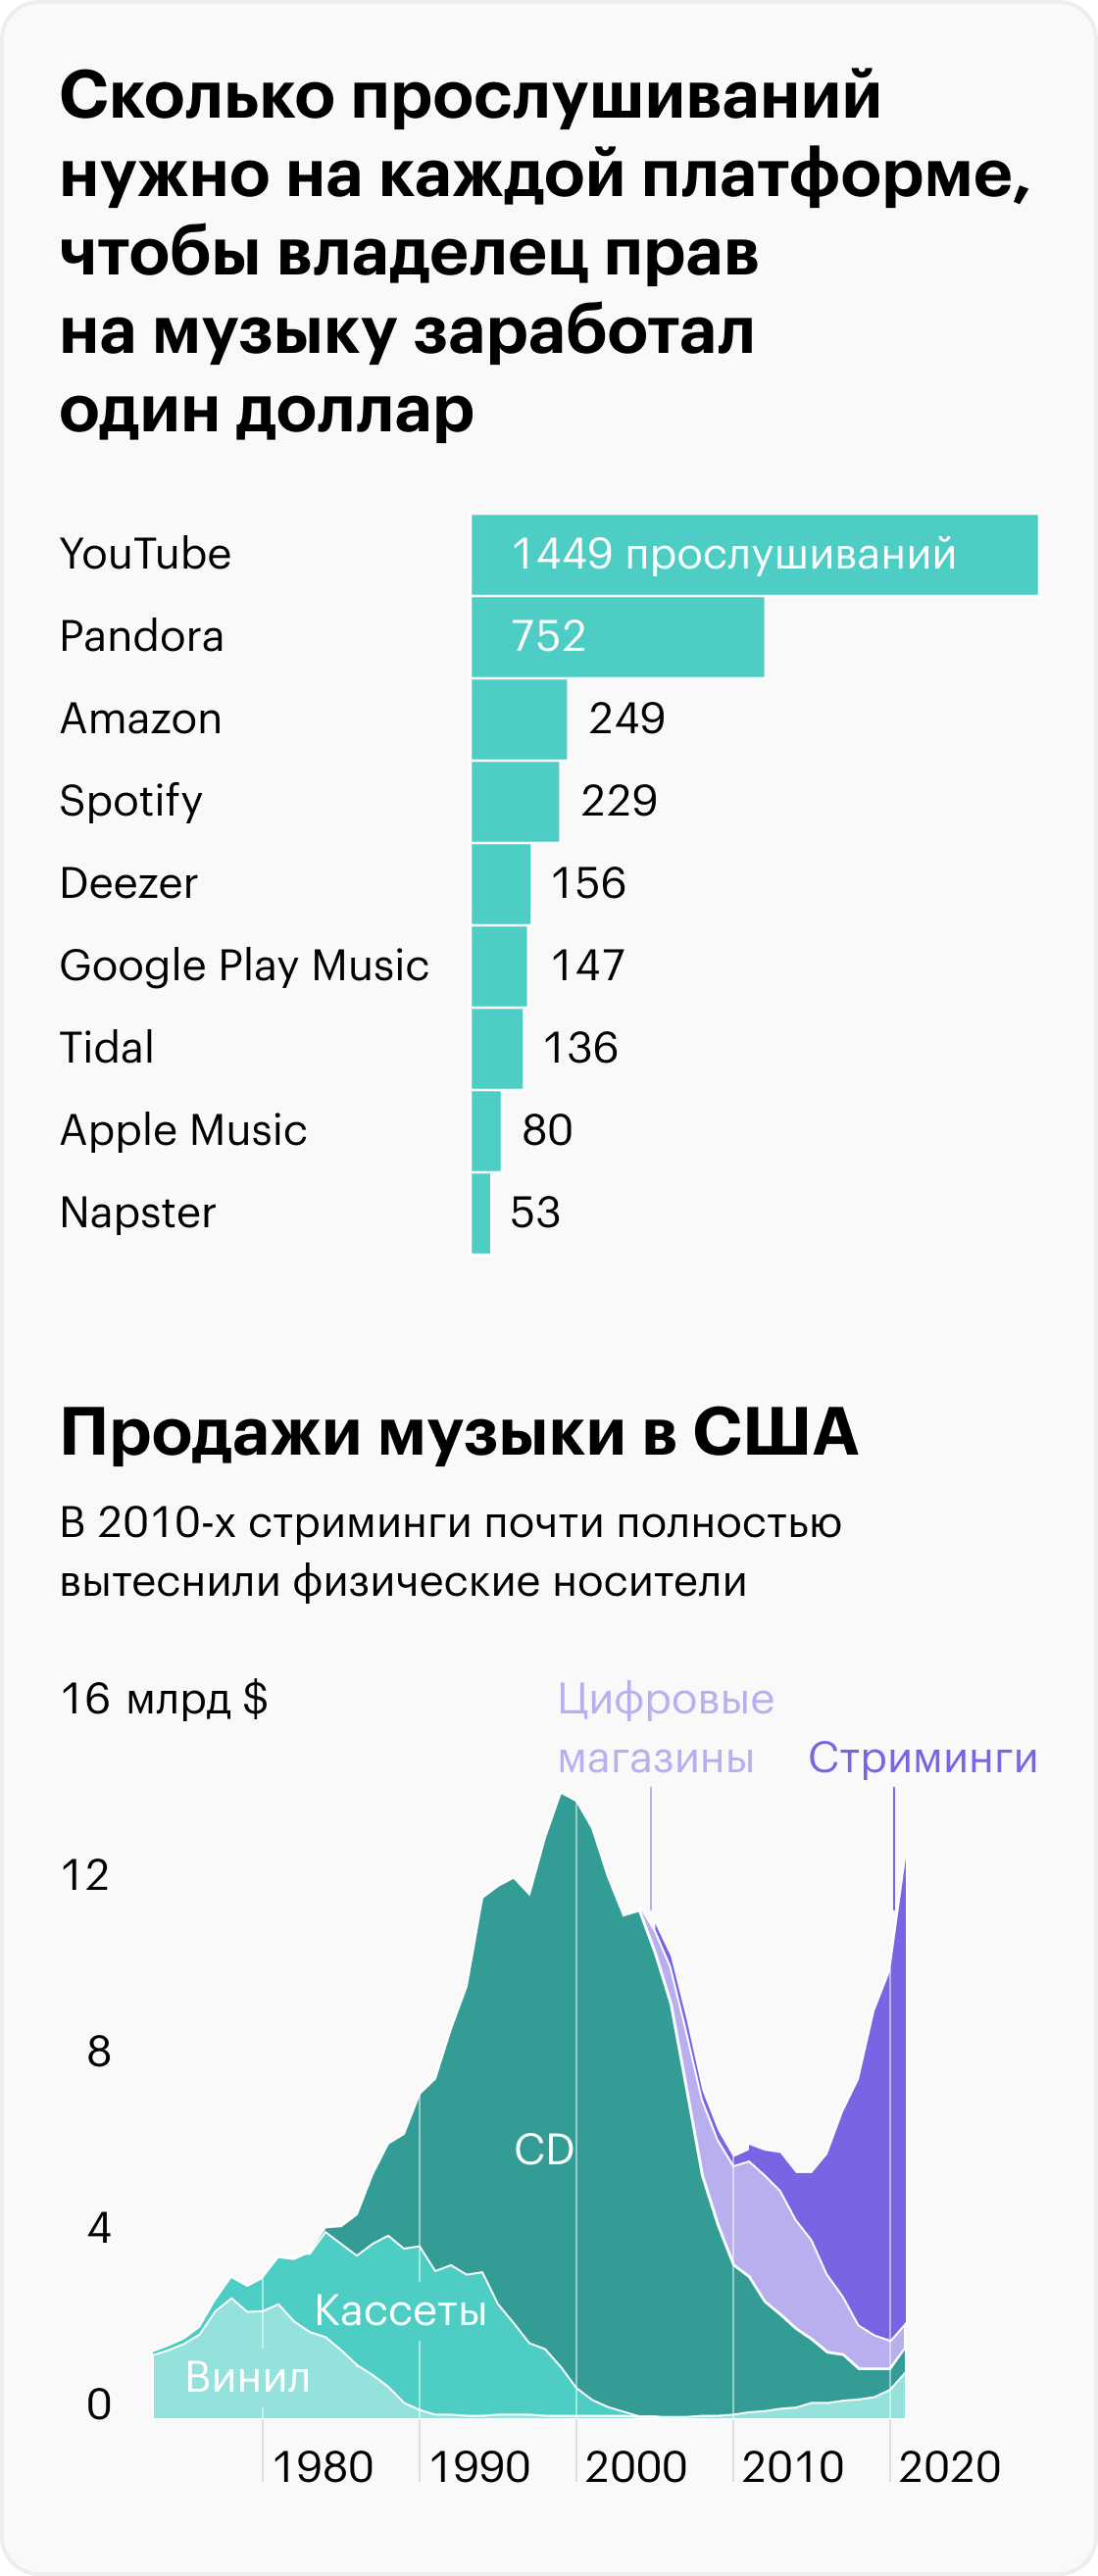 Источник: Visual Capitalist, streams to make a dollar, the rise and fall of music formats